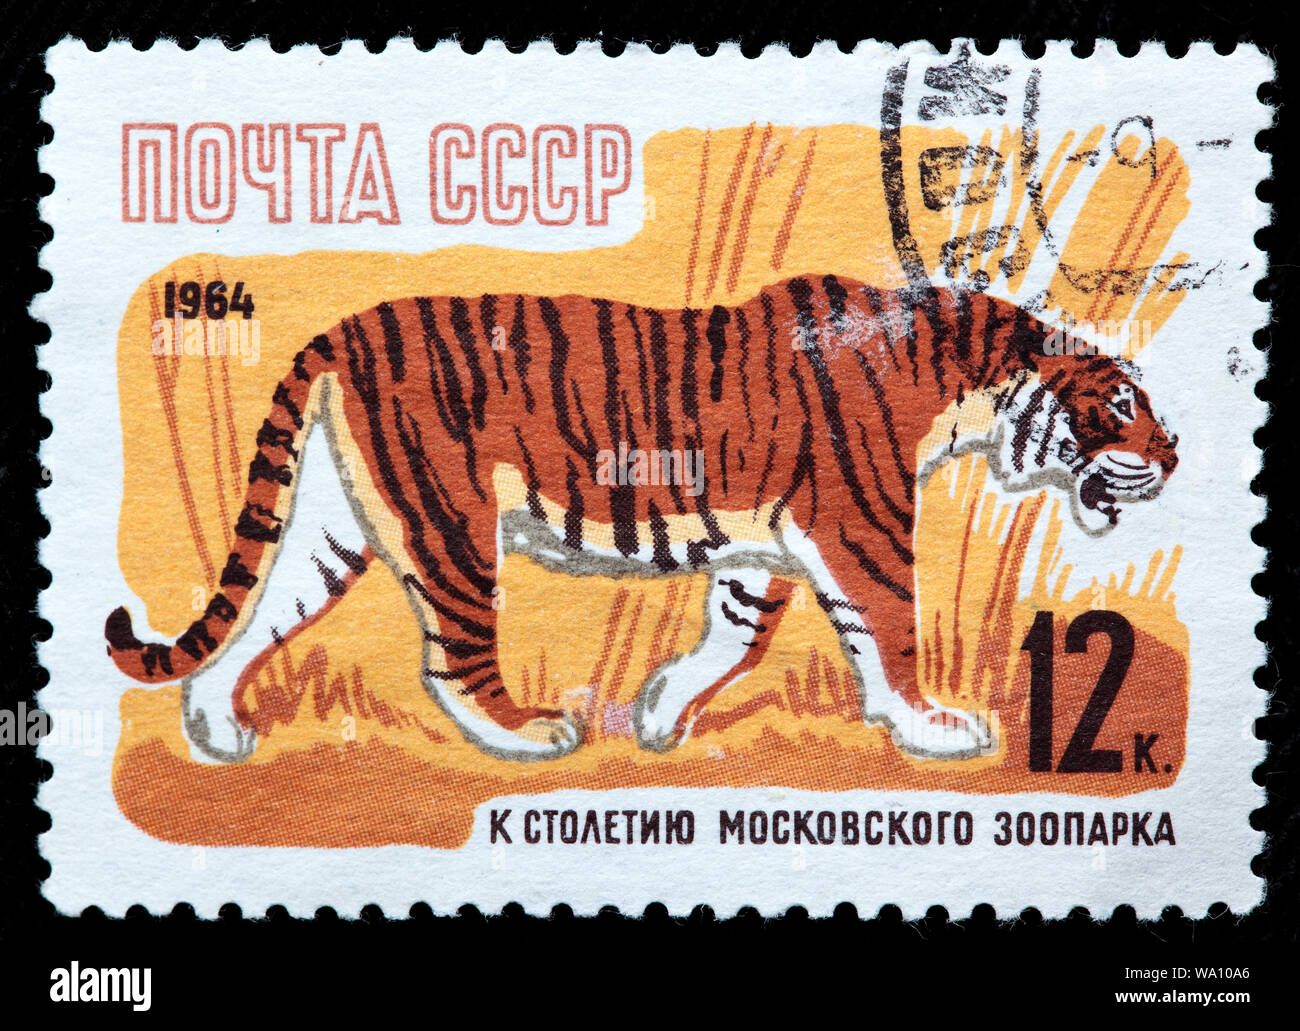 Bengal Tiger, Panthera tigris, Moscow Zoo Centenary, postage stamp, Russia, USSR, 1964 Stock Photo